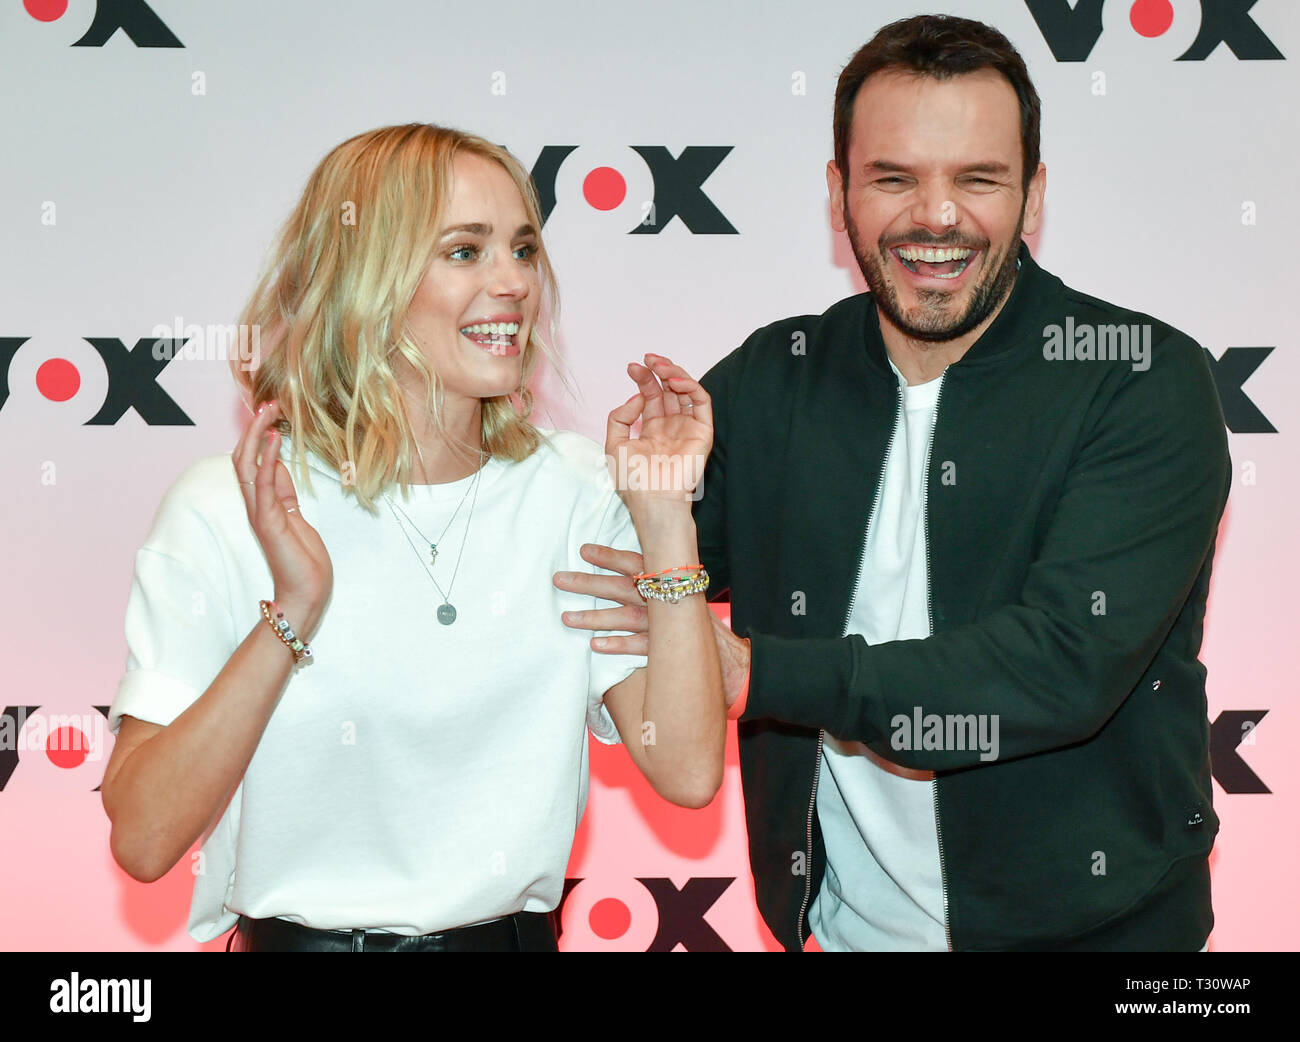 Berlin, Germany. 05th Apr, 2019. Annie Hoffmann and Steffen Henssler from  the show "Grill den Henssler" take part in a press event of the TV channel  Vox. Credit: Jens Kalaene/dpa-Zentralbild/dpa/Alamy Live News